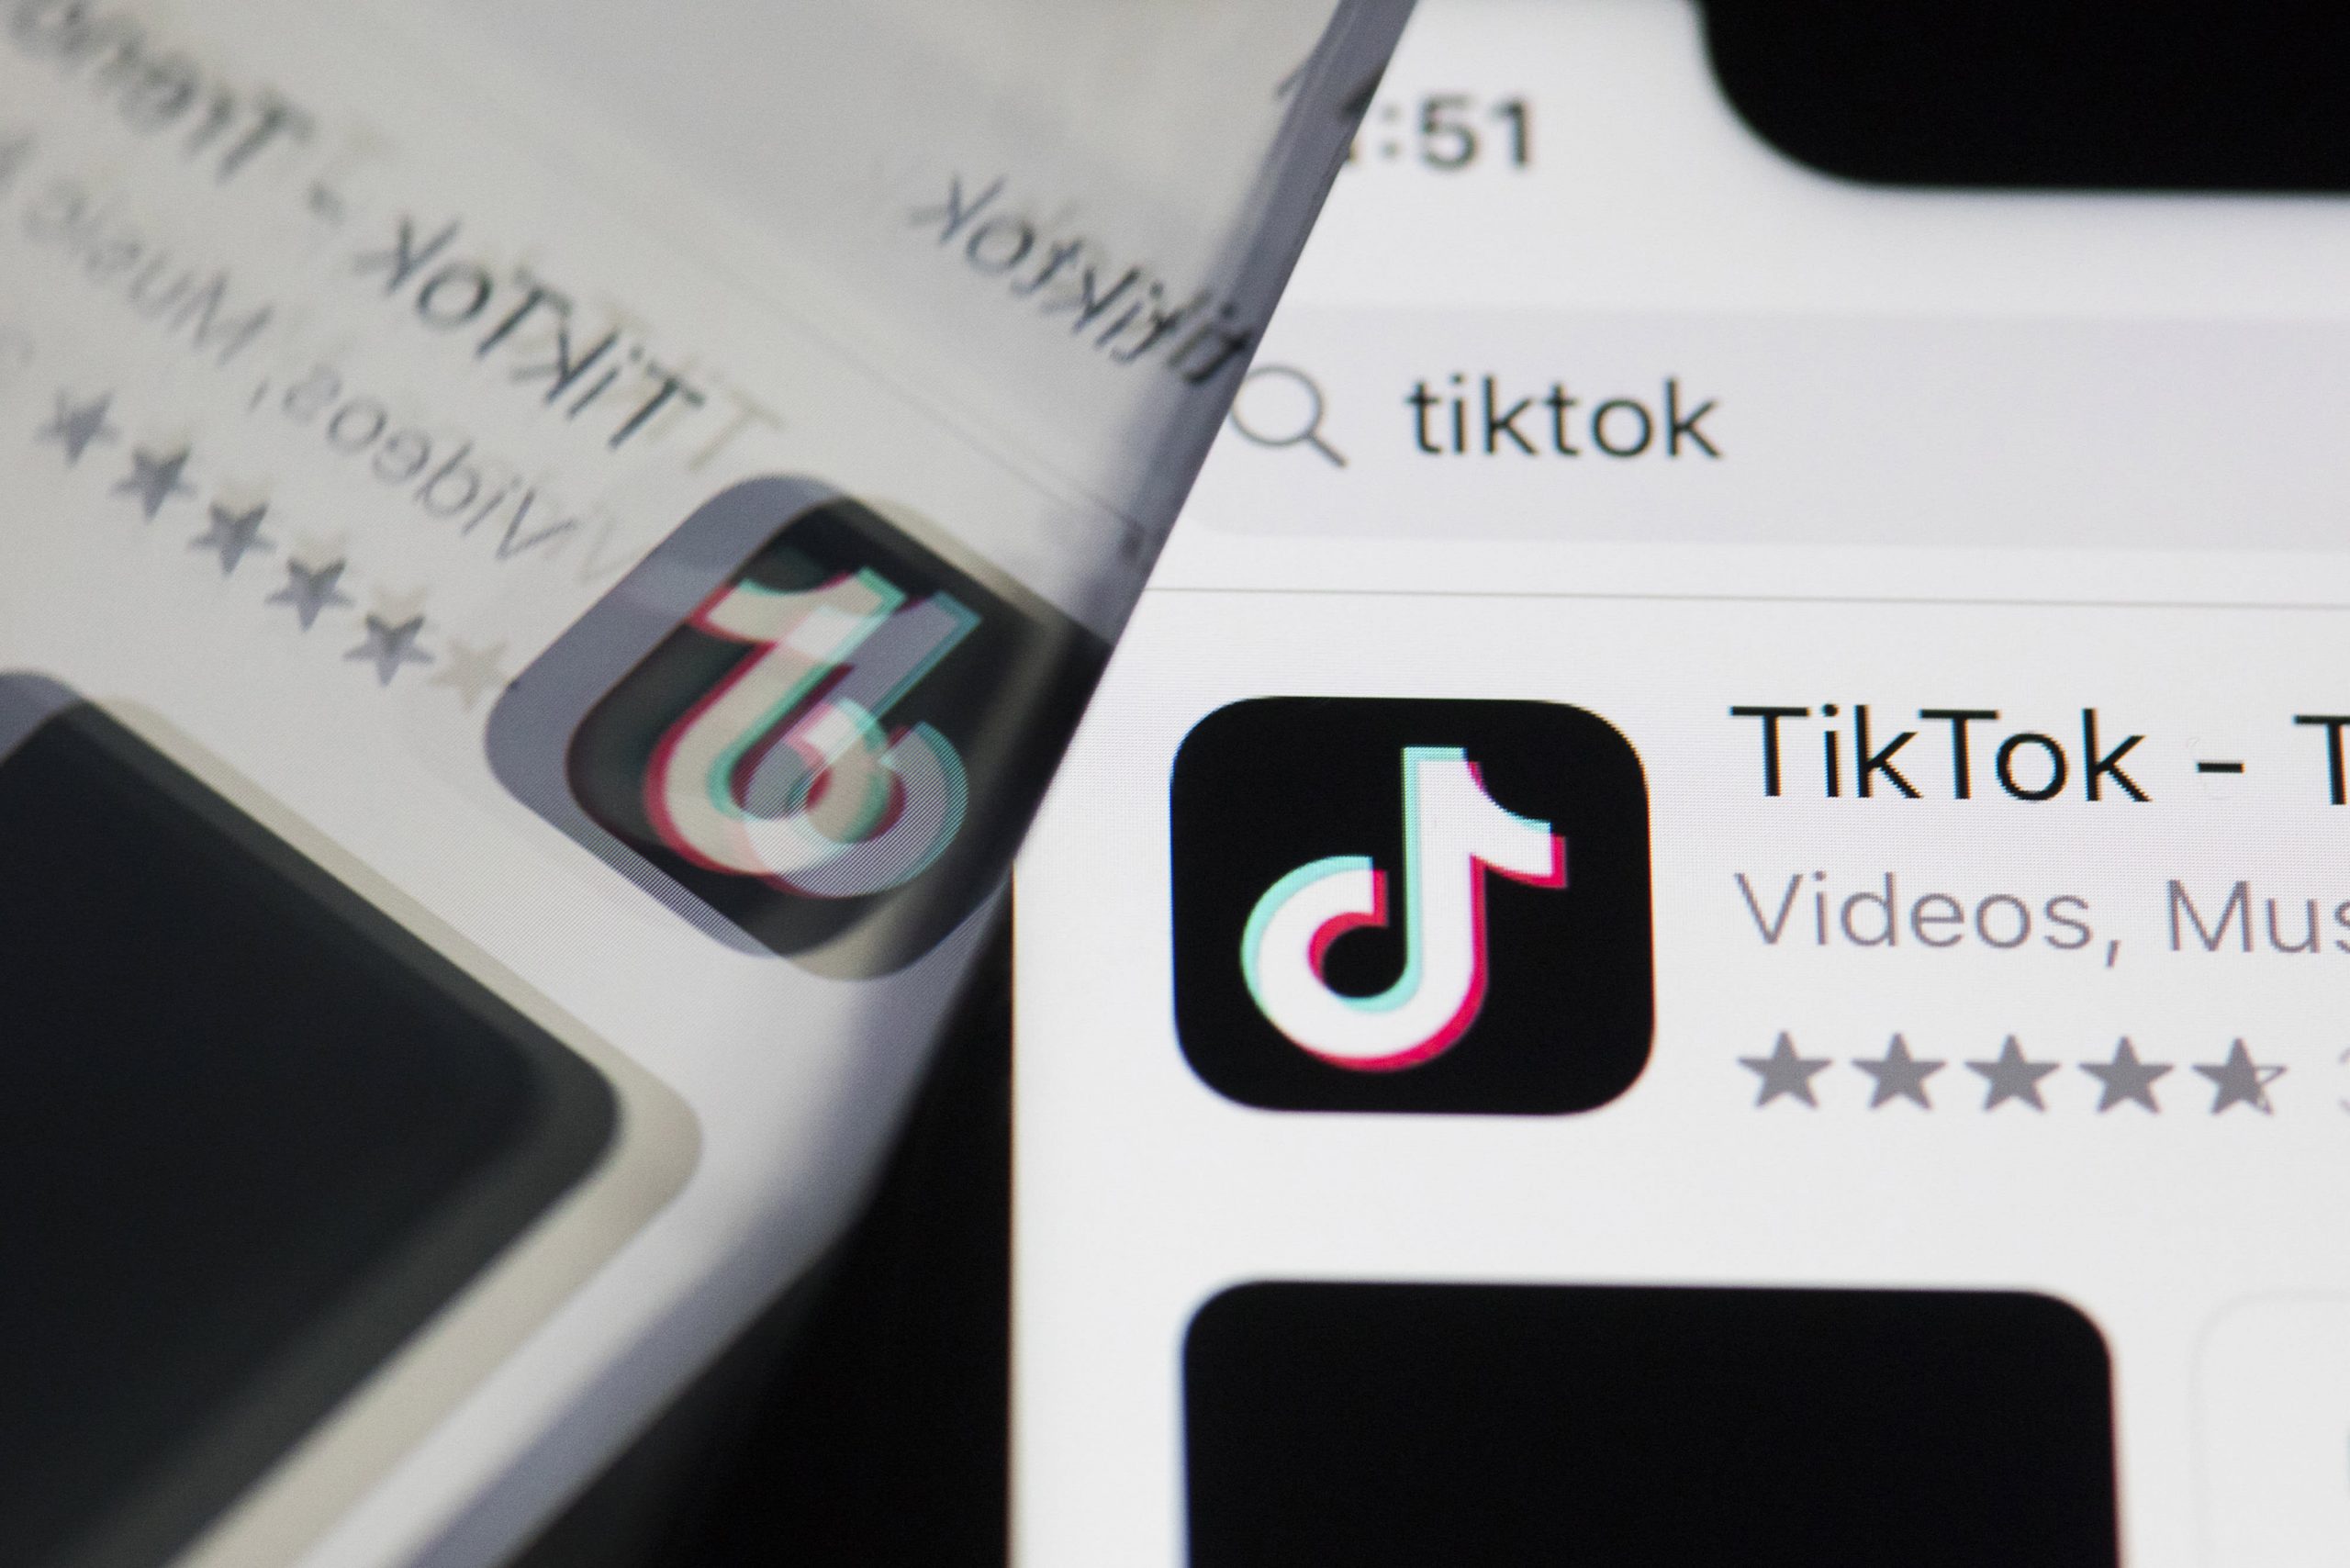 TikTok is on a hiring spree in Ireland and expects to have over 1,100 staff there by January